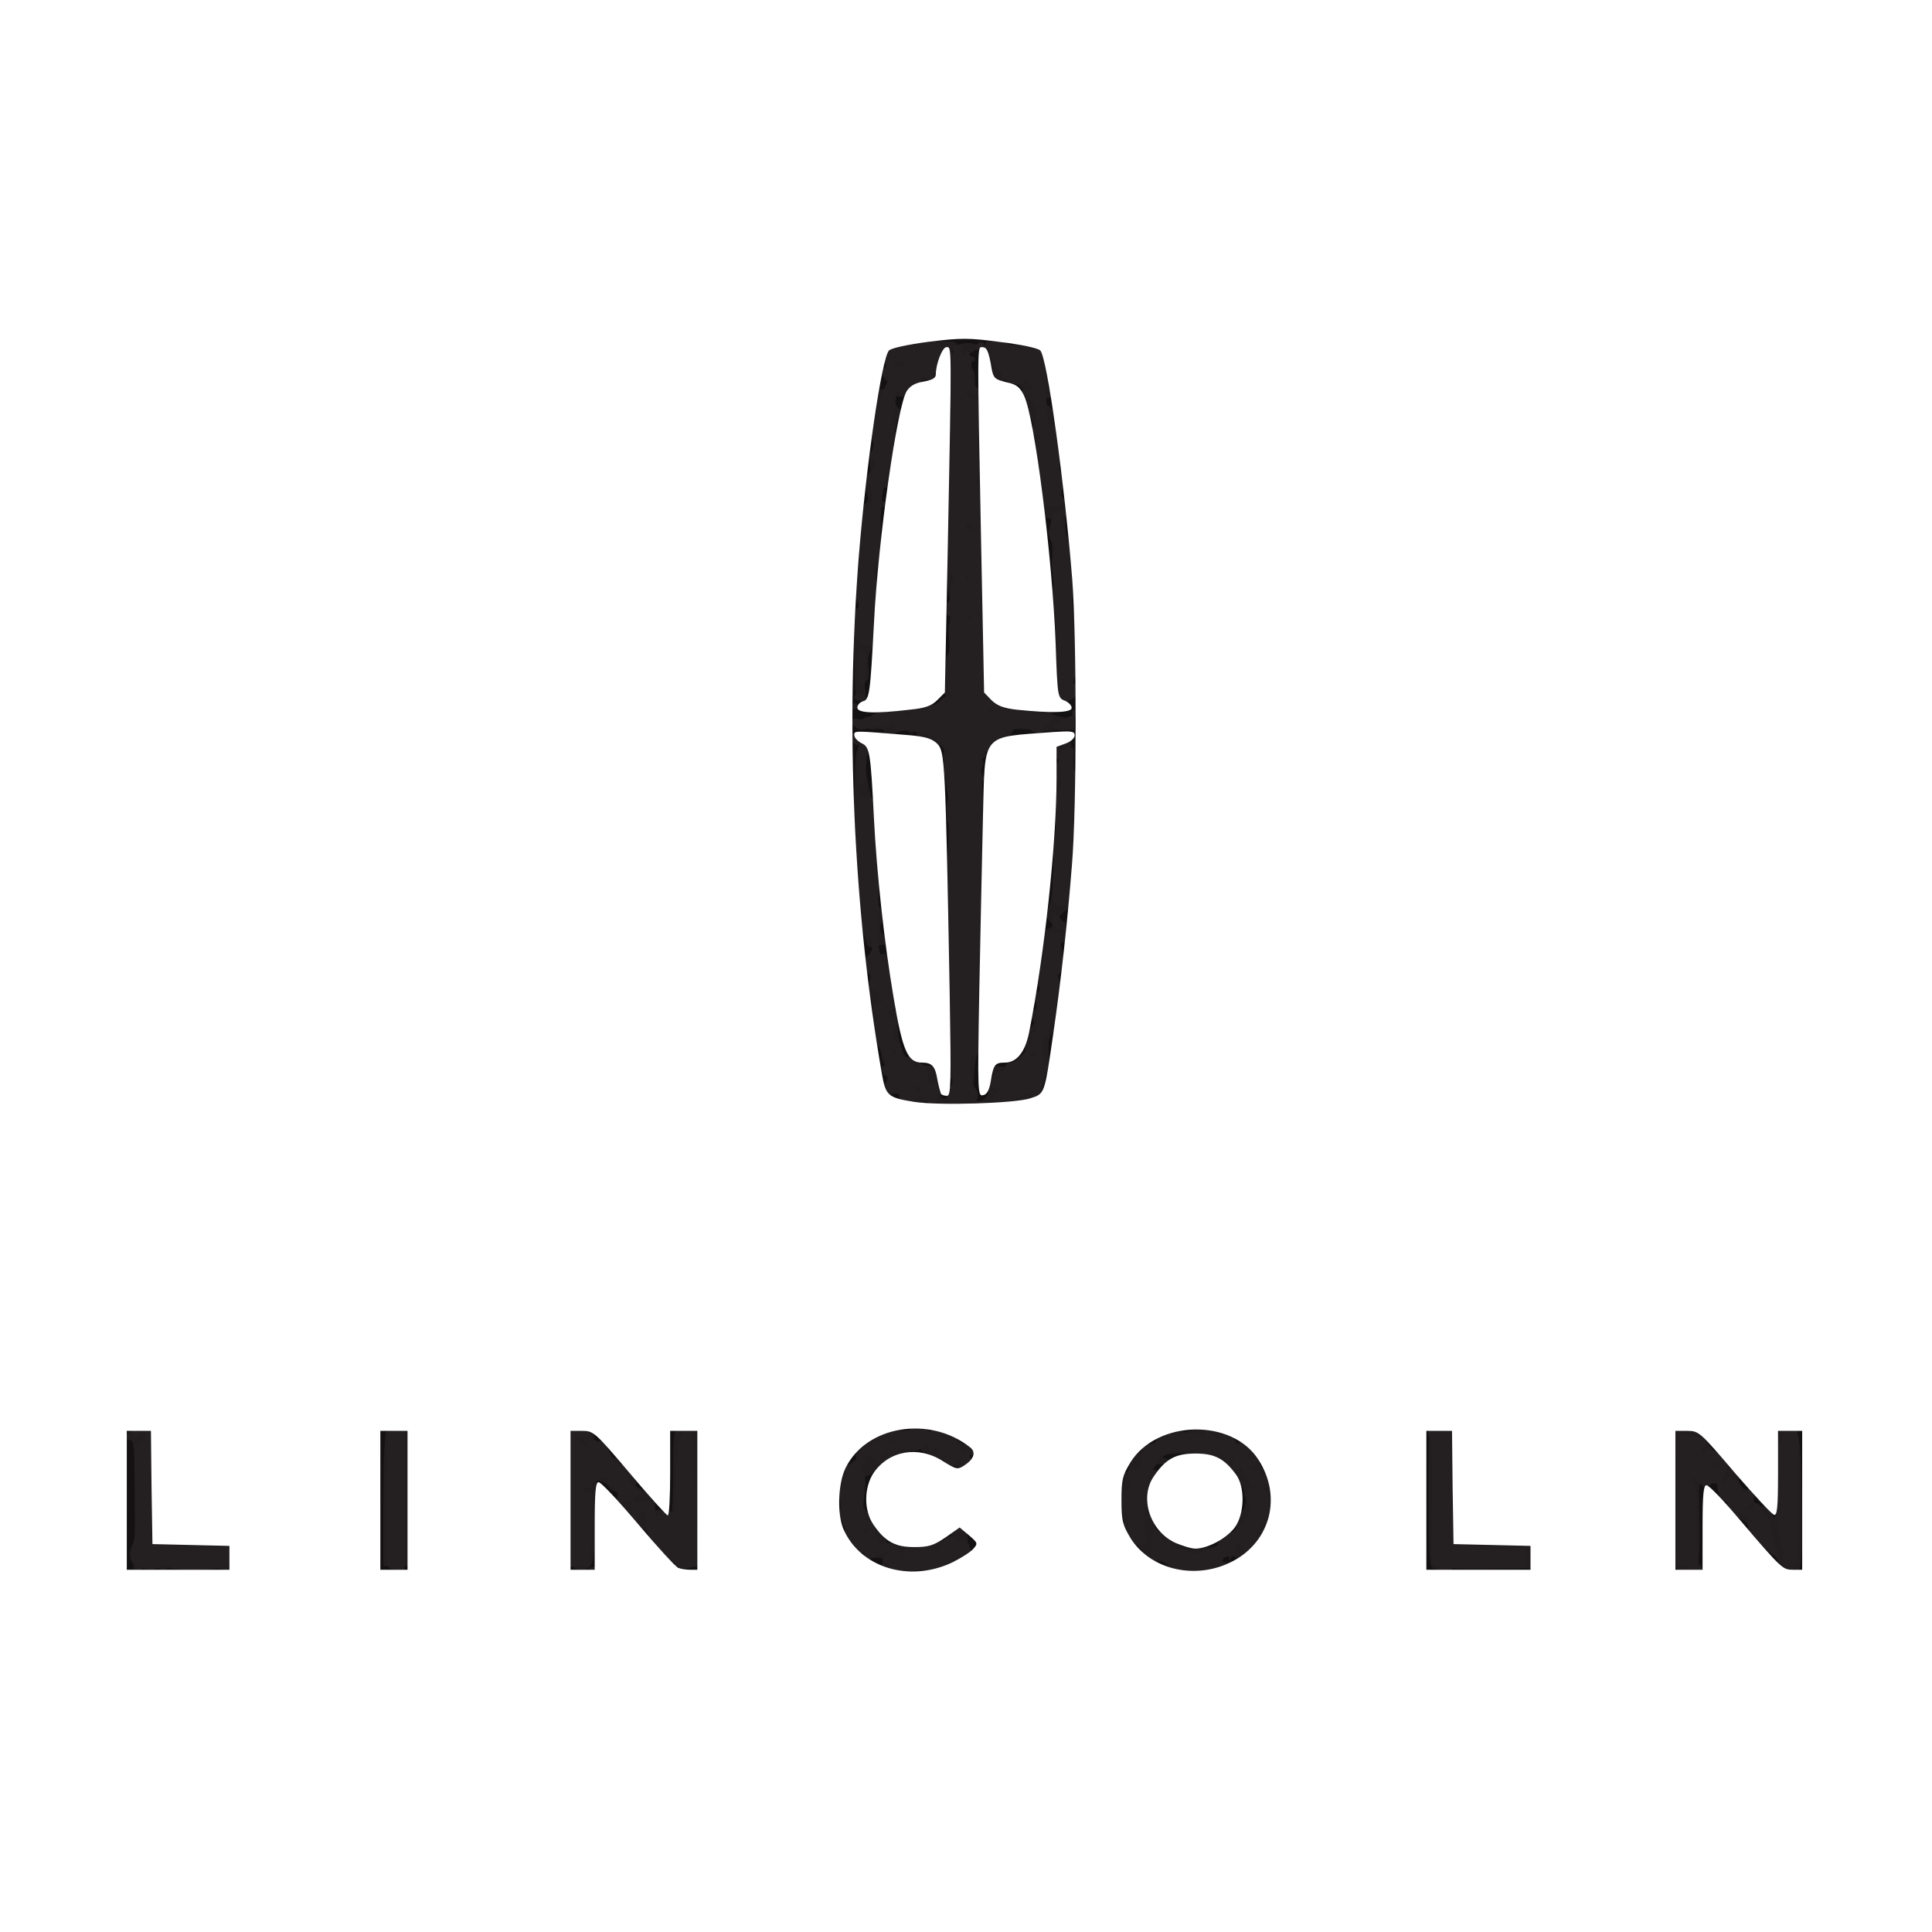 Lincoln National logo colors